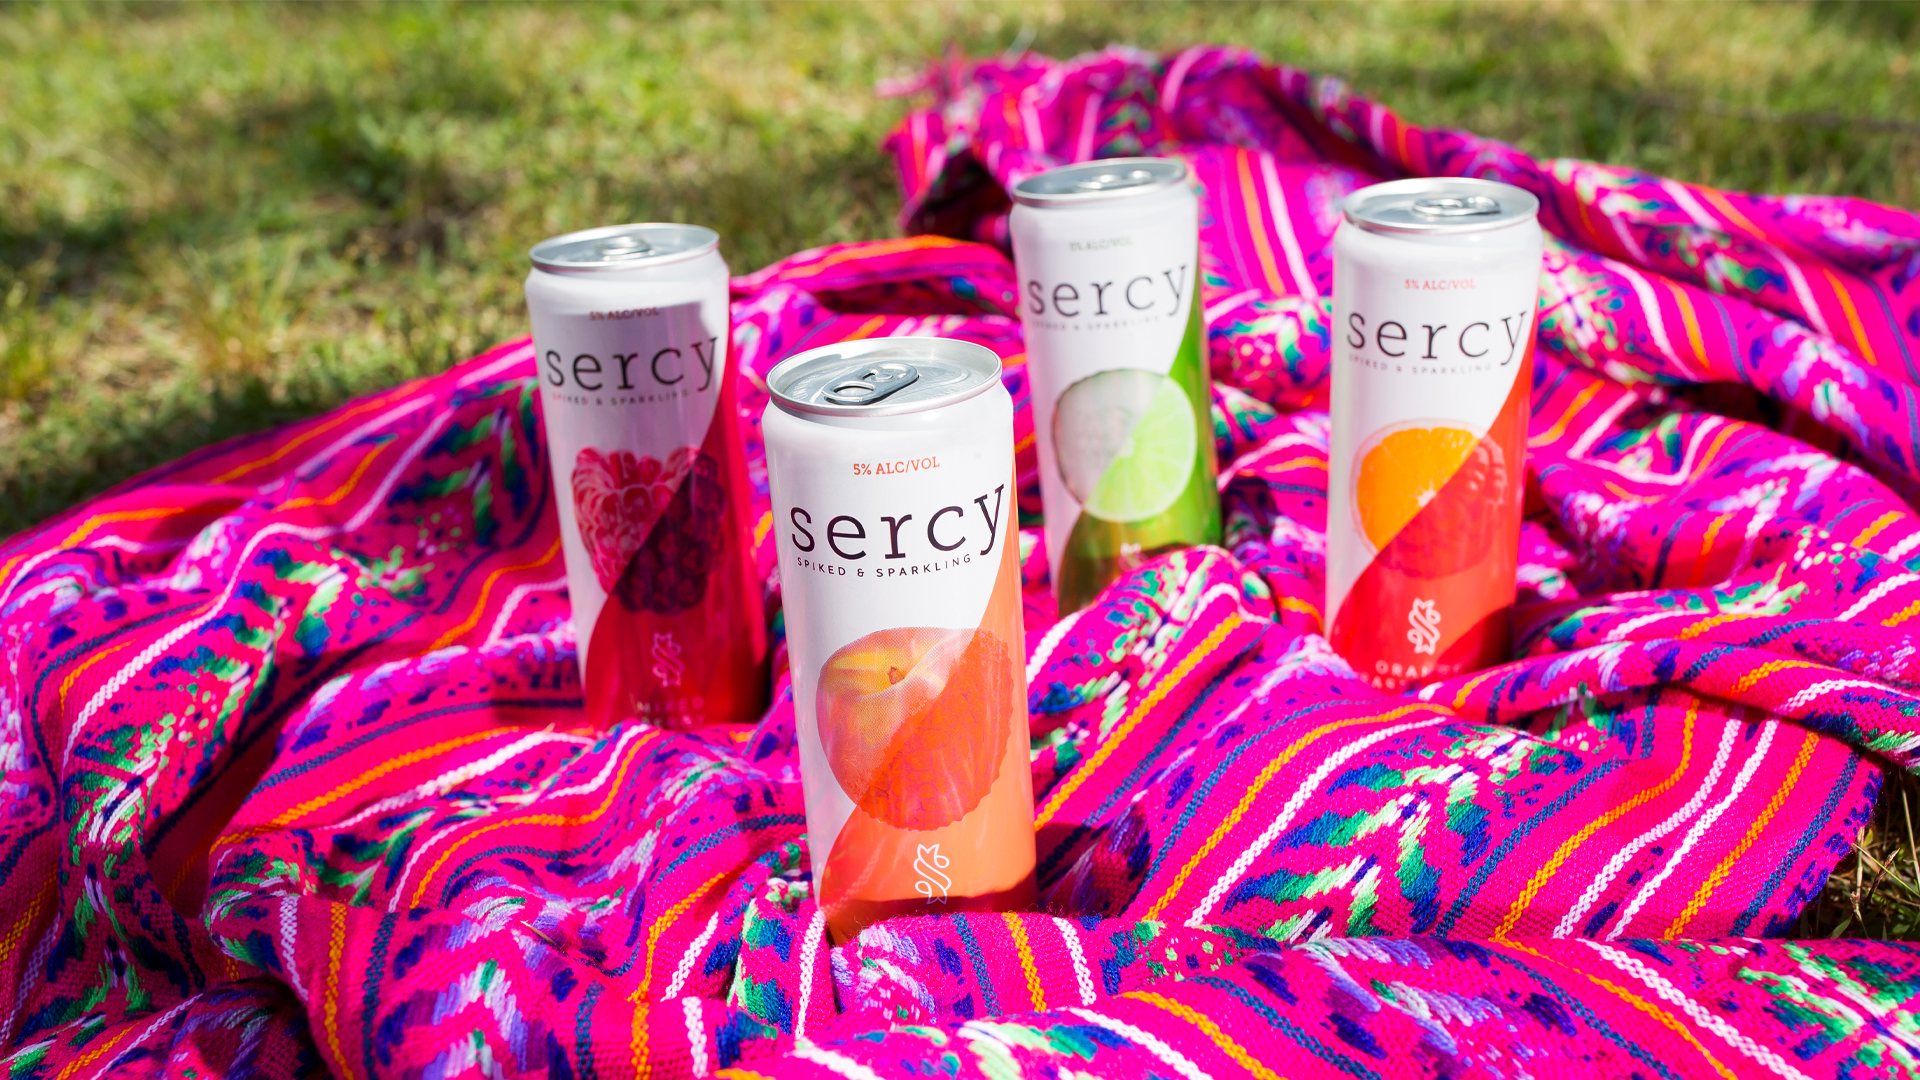 Sercy Cans on Blanket